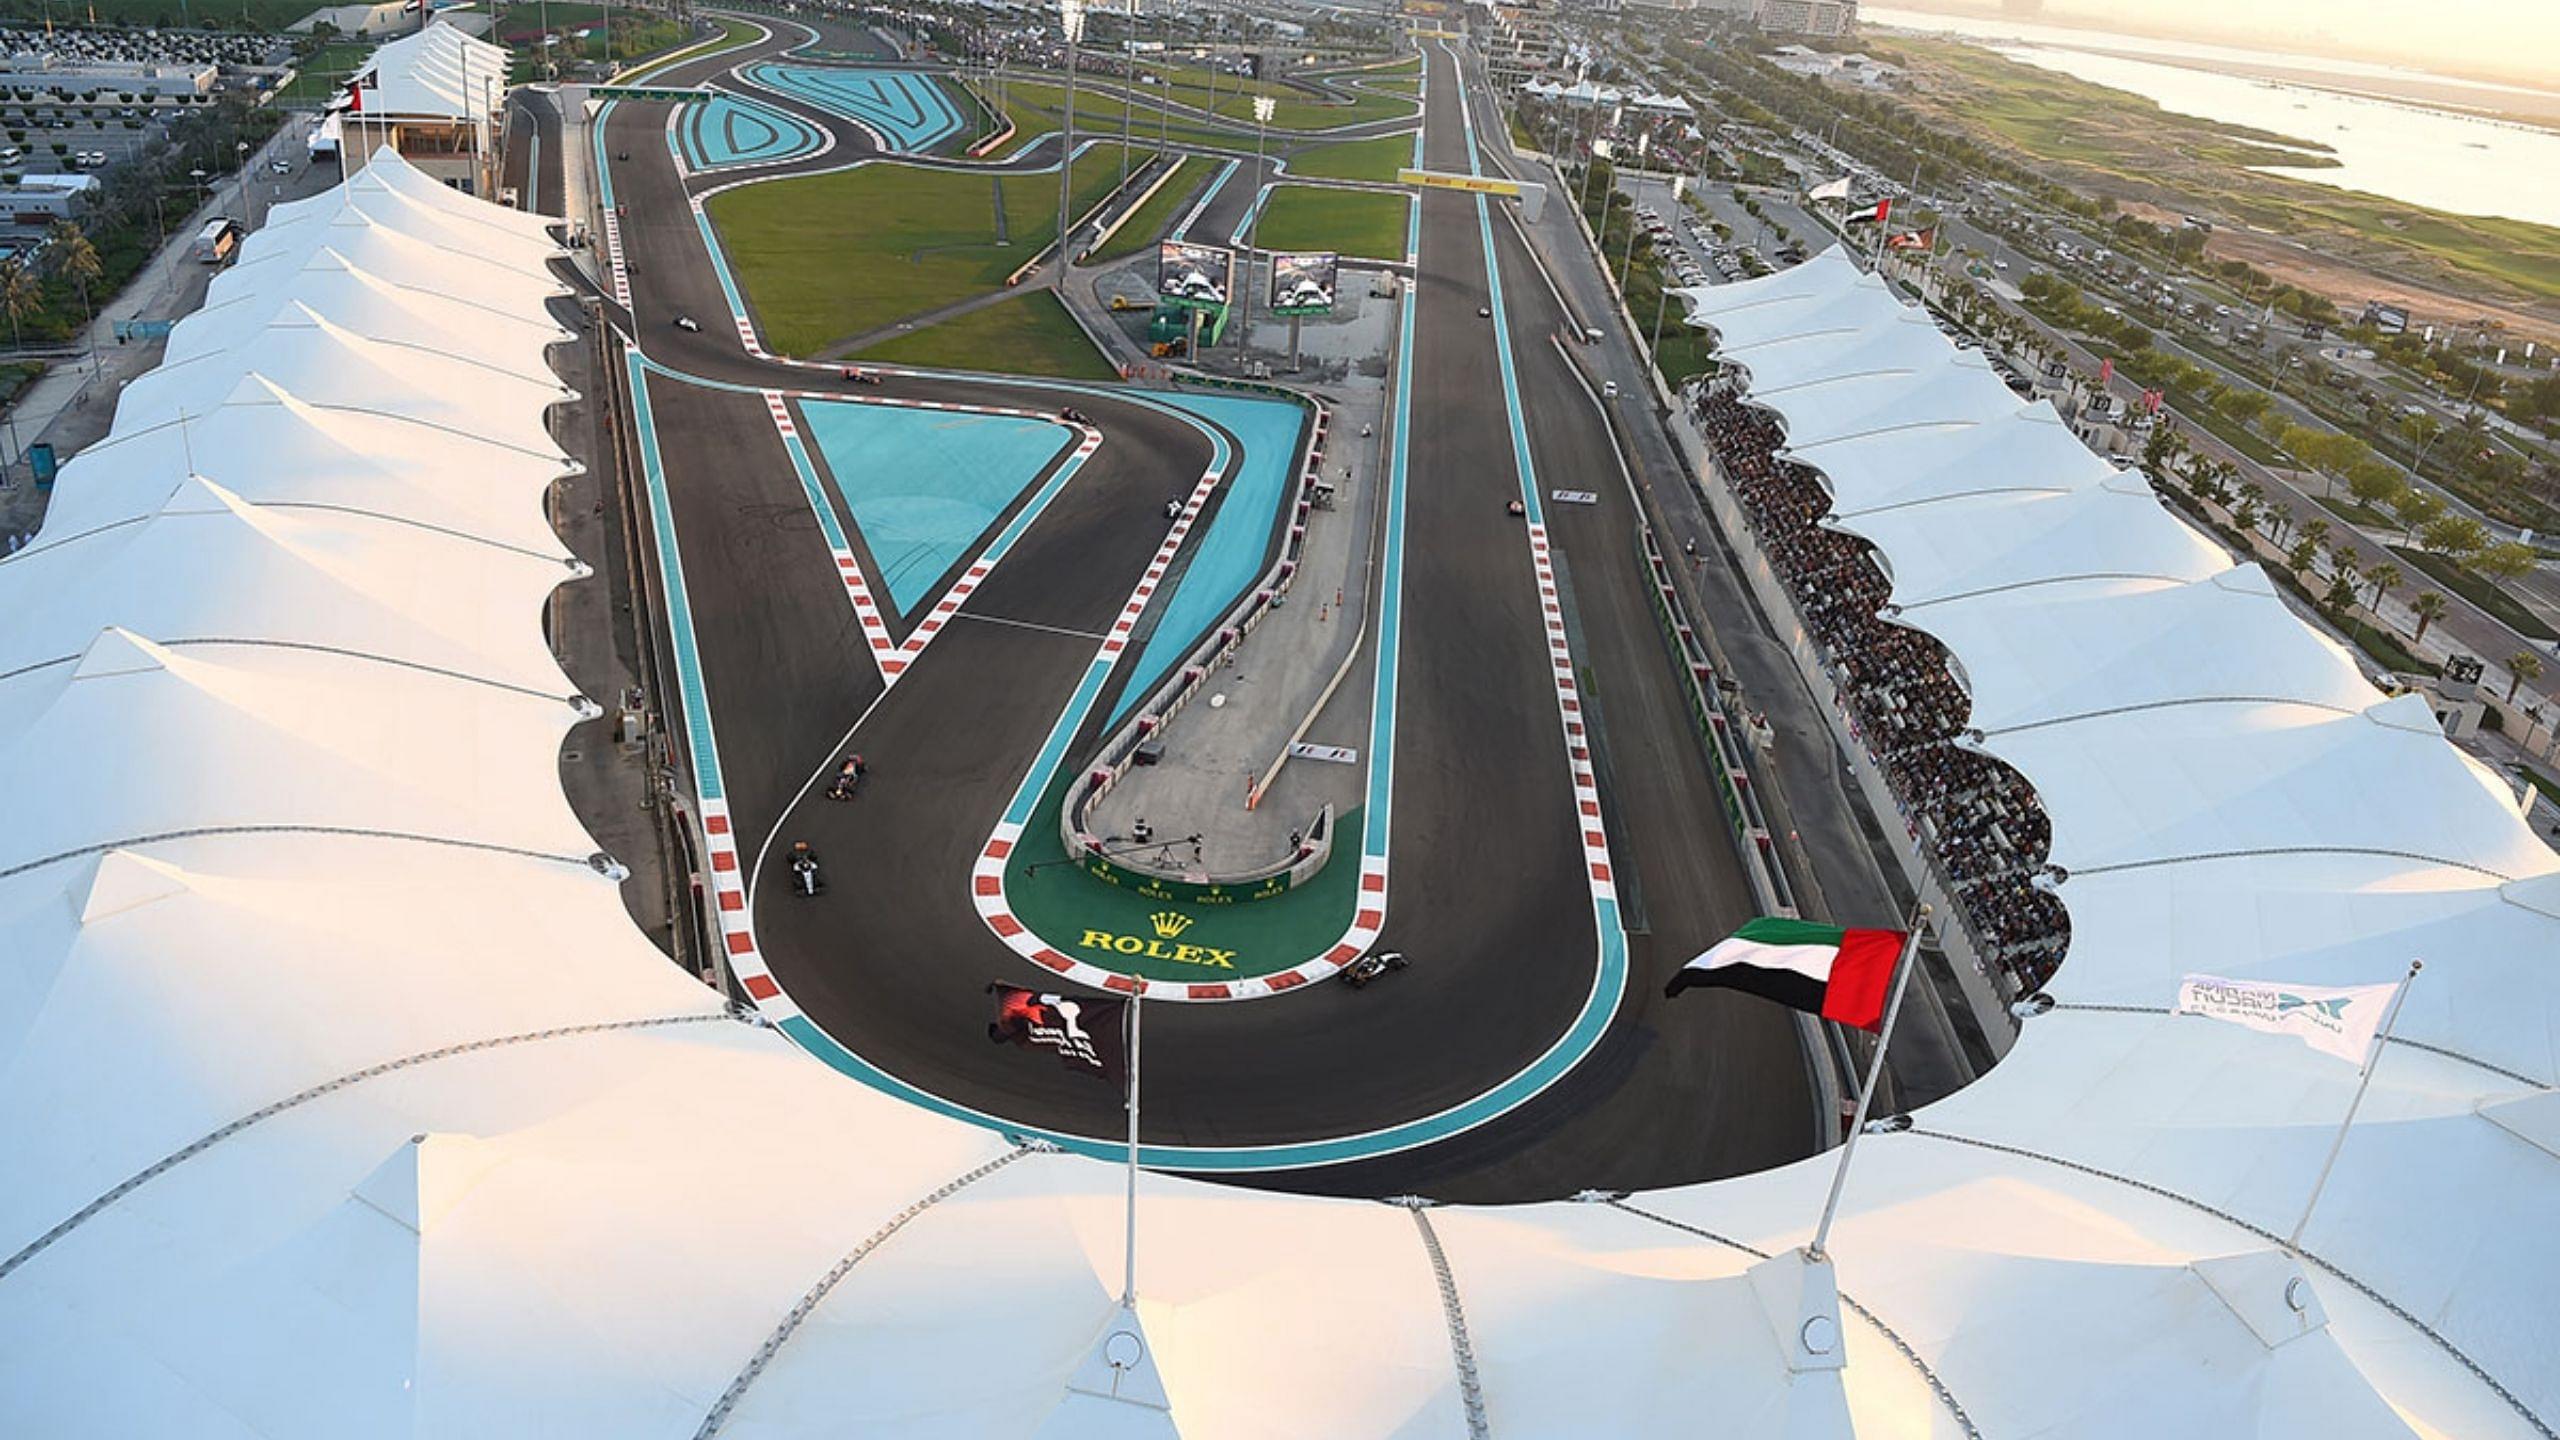 Mercedes boss Toto Wolff suggests a different track configuration for Abu Dhabi GP after receiving "most sleeping emoji ever"